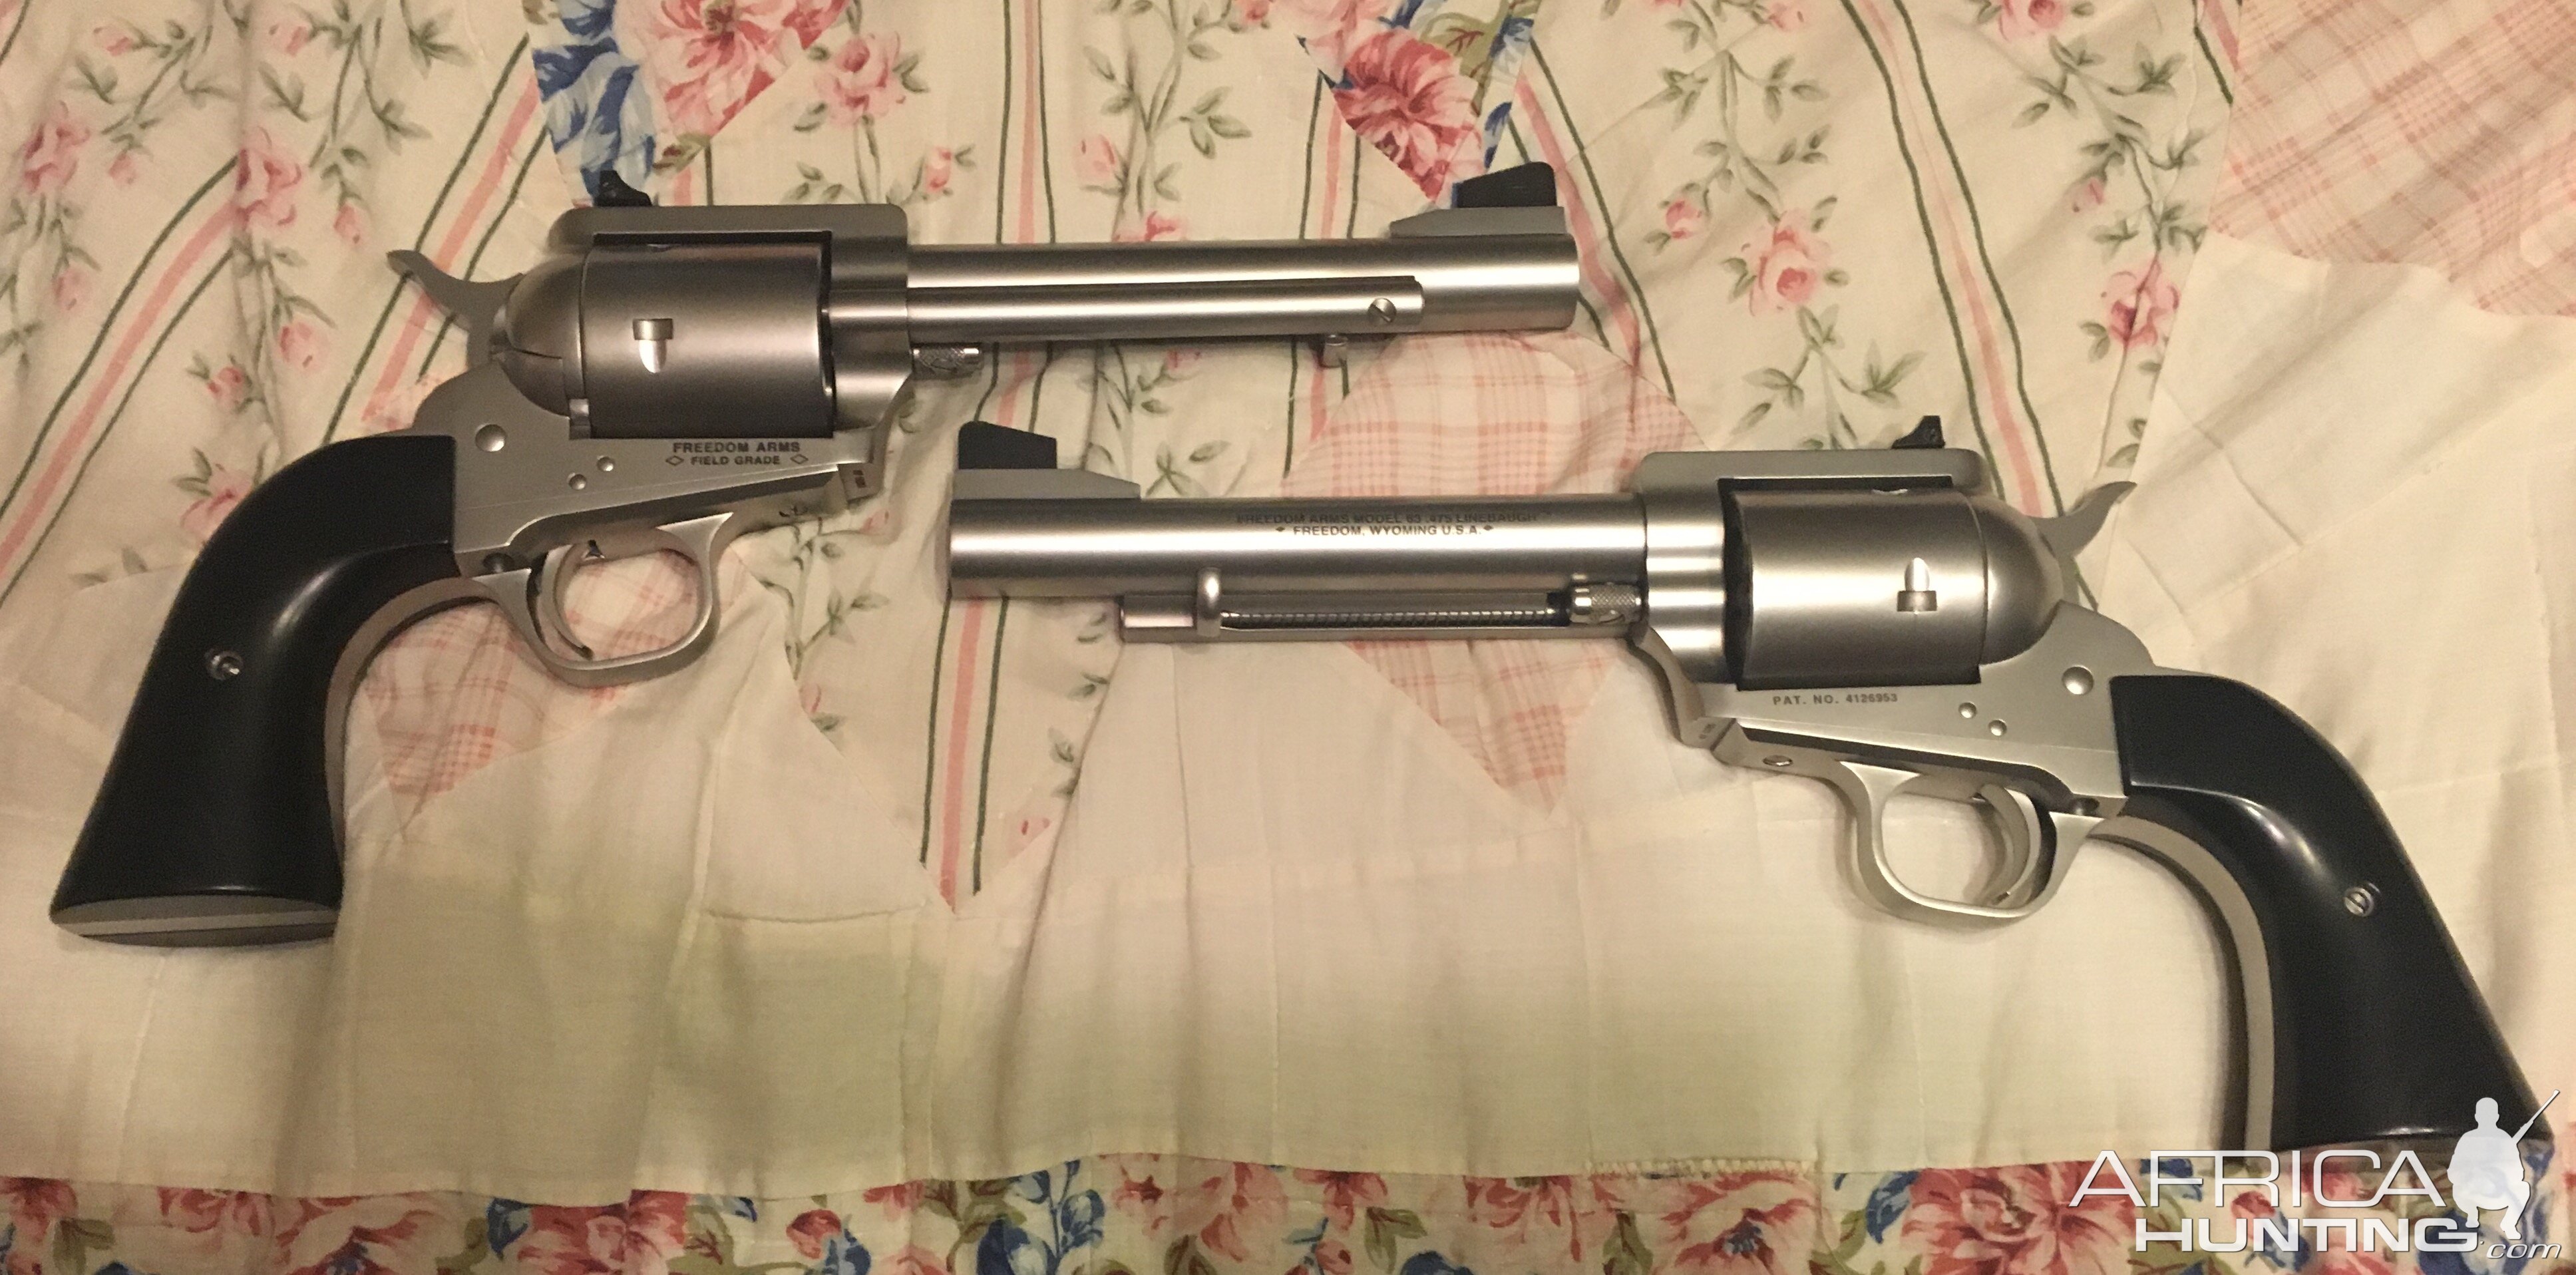 A pair of Freedom Arms revolvers